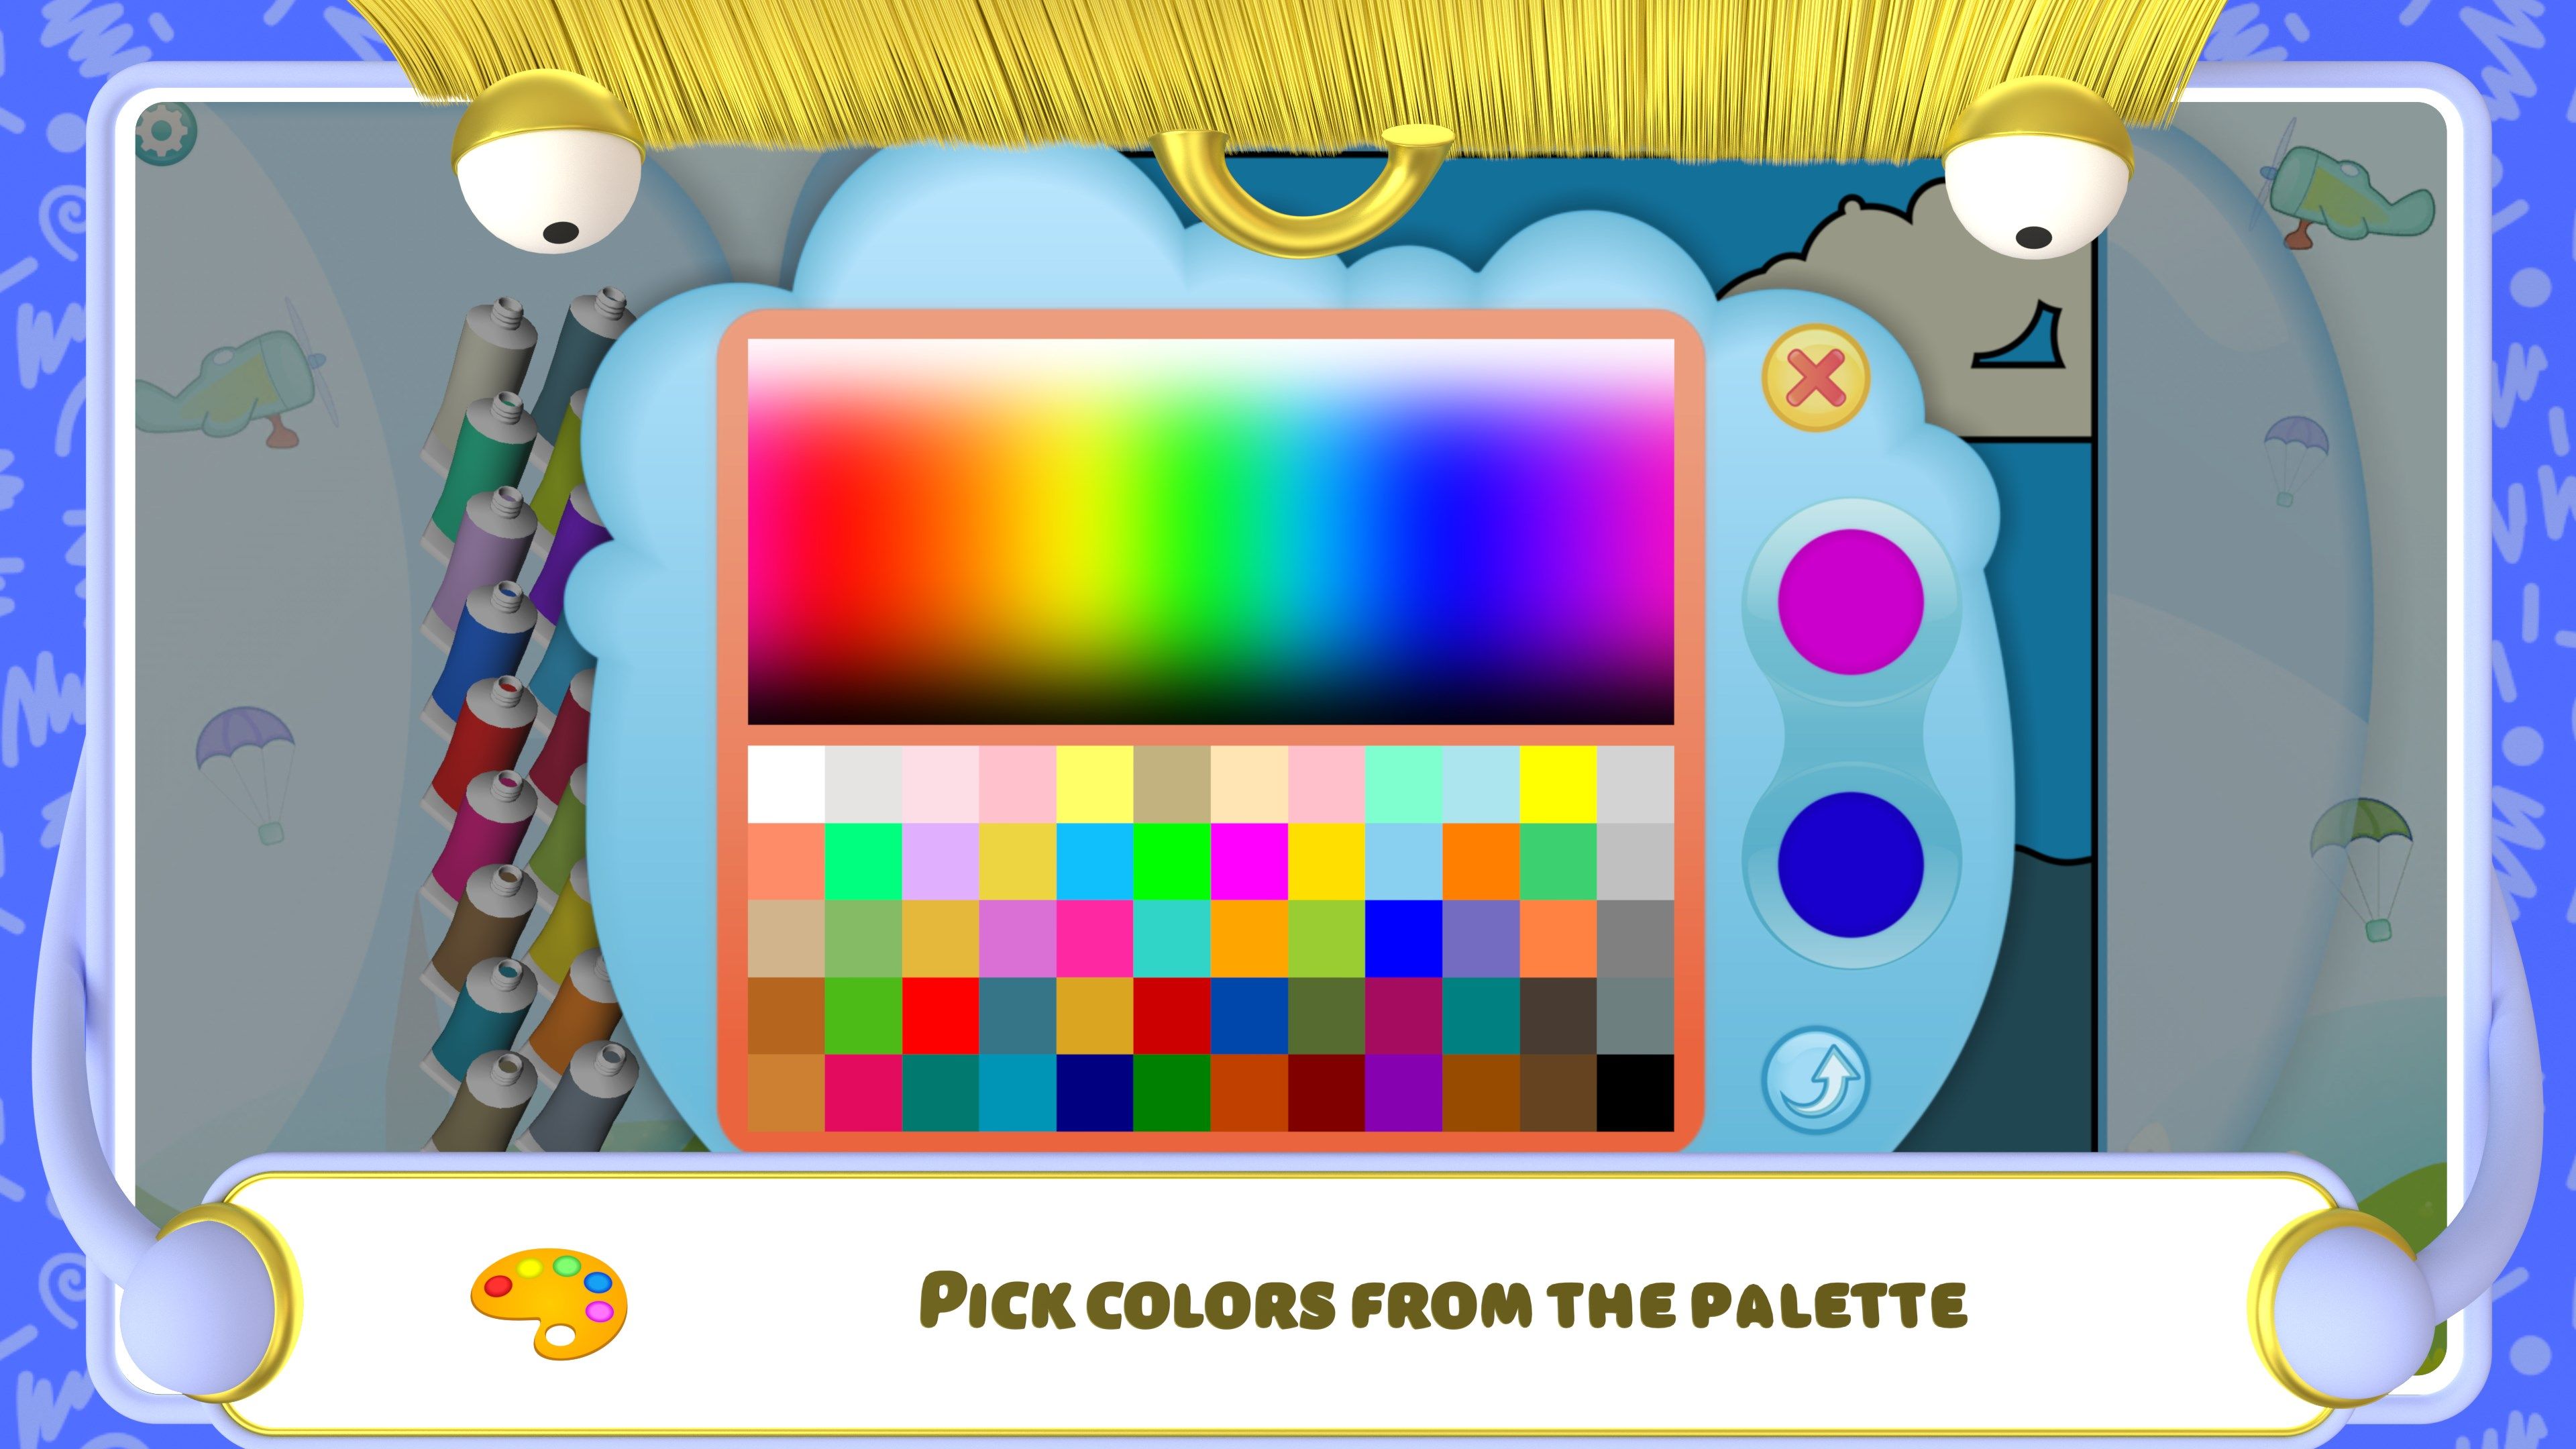 Pick colors from the palette